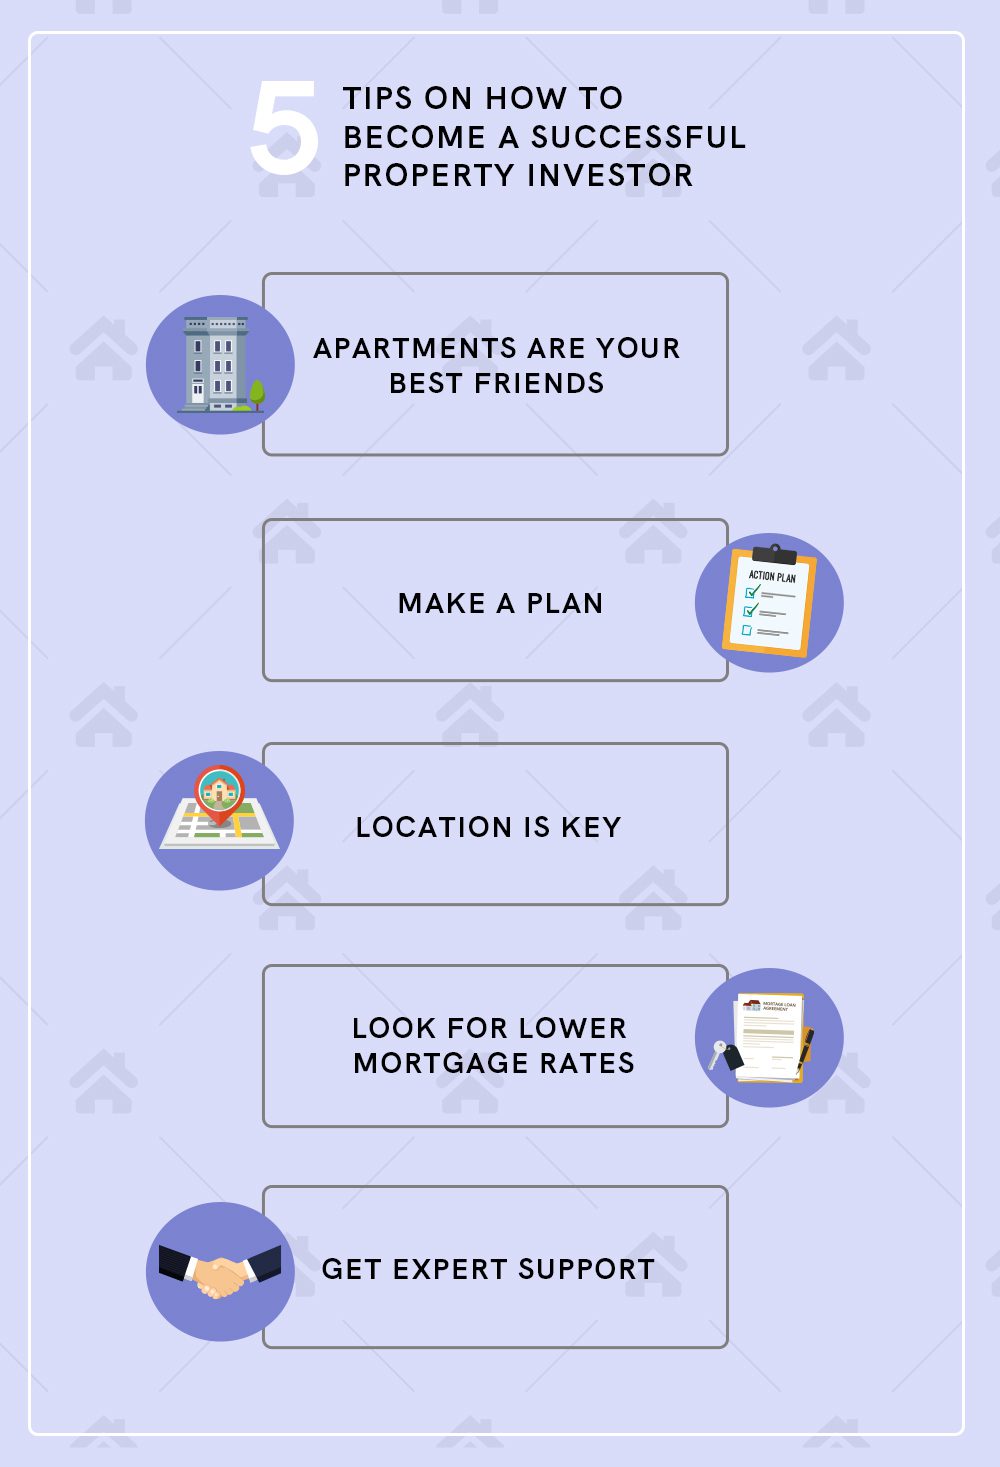 5 Tips: How to Become a Successful Property Investor infographic